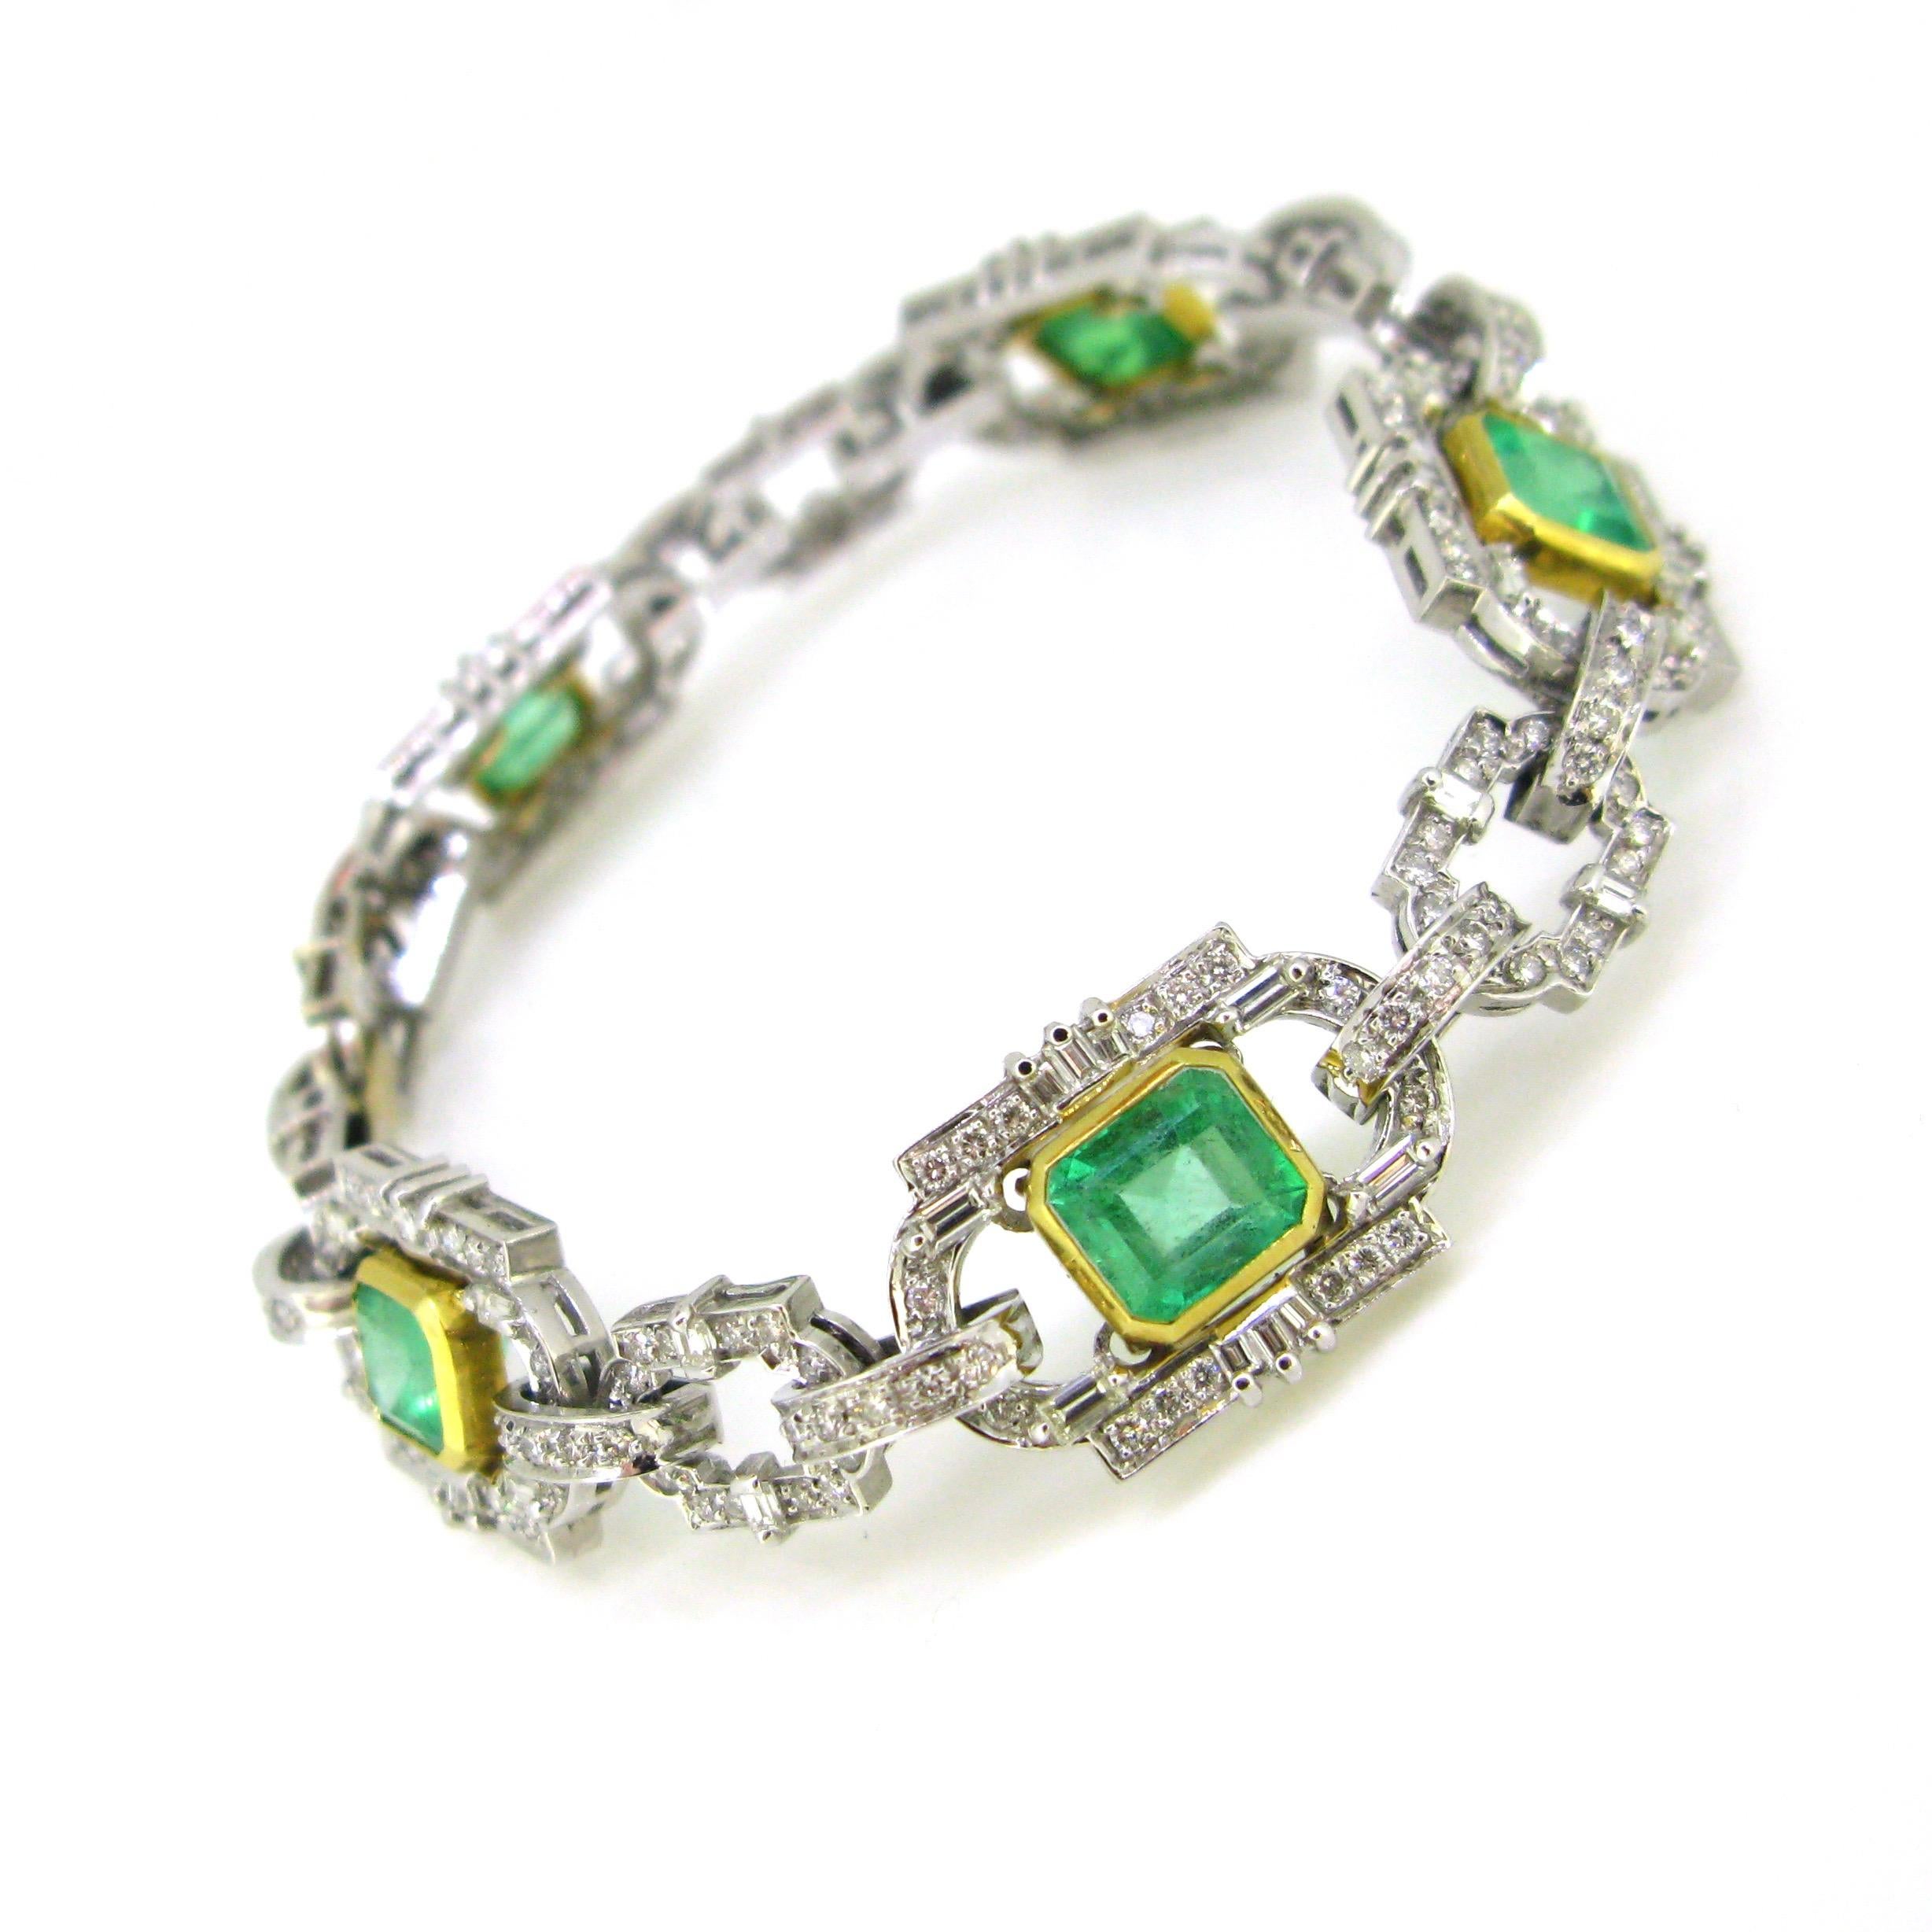 This bracelet has a nice geometric design, inspired by the Art Deco style. It comprises 5 links set with Colombian emeralds, tested as moderate. They are set on yellow gold. They are around between 1.40 and 2ct, with an approximate total carat